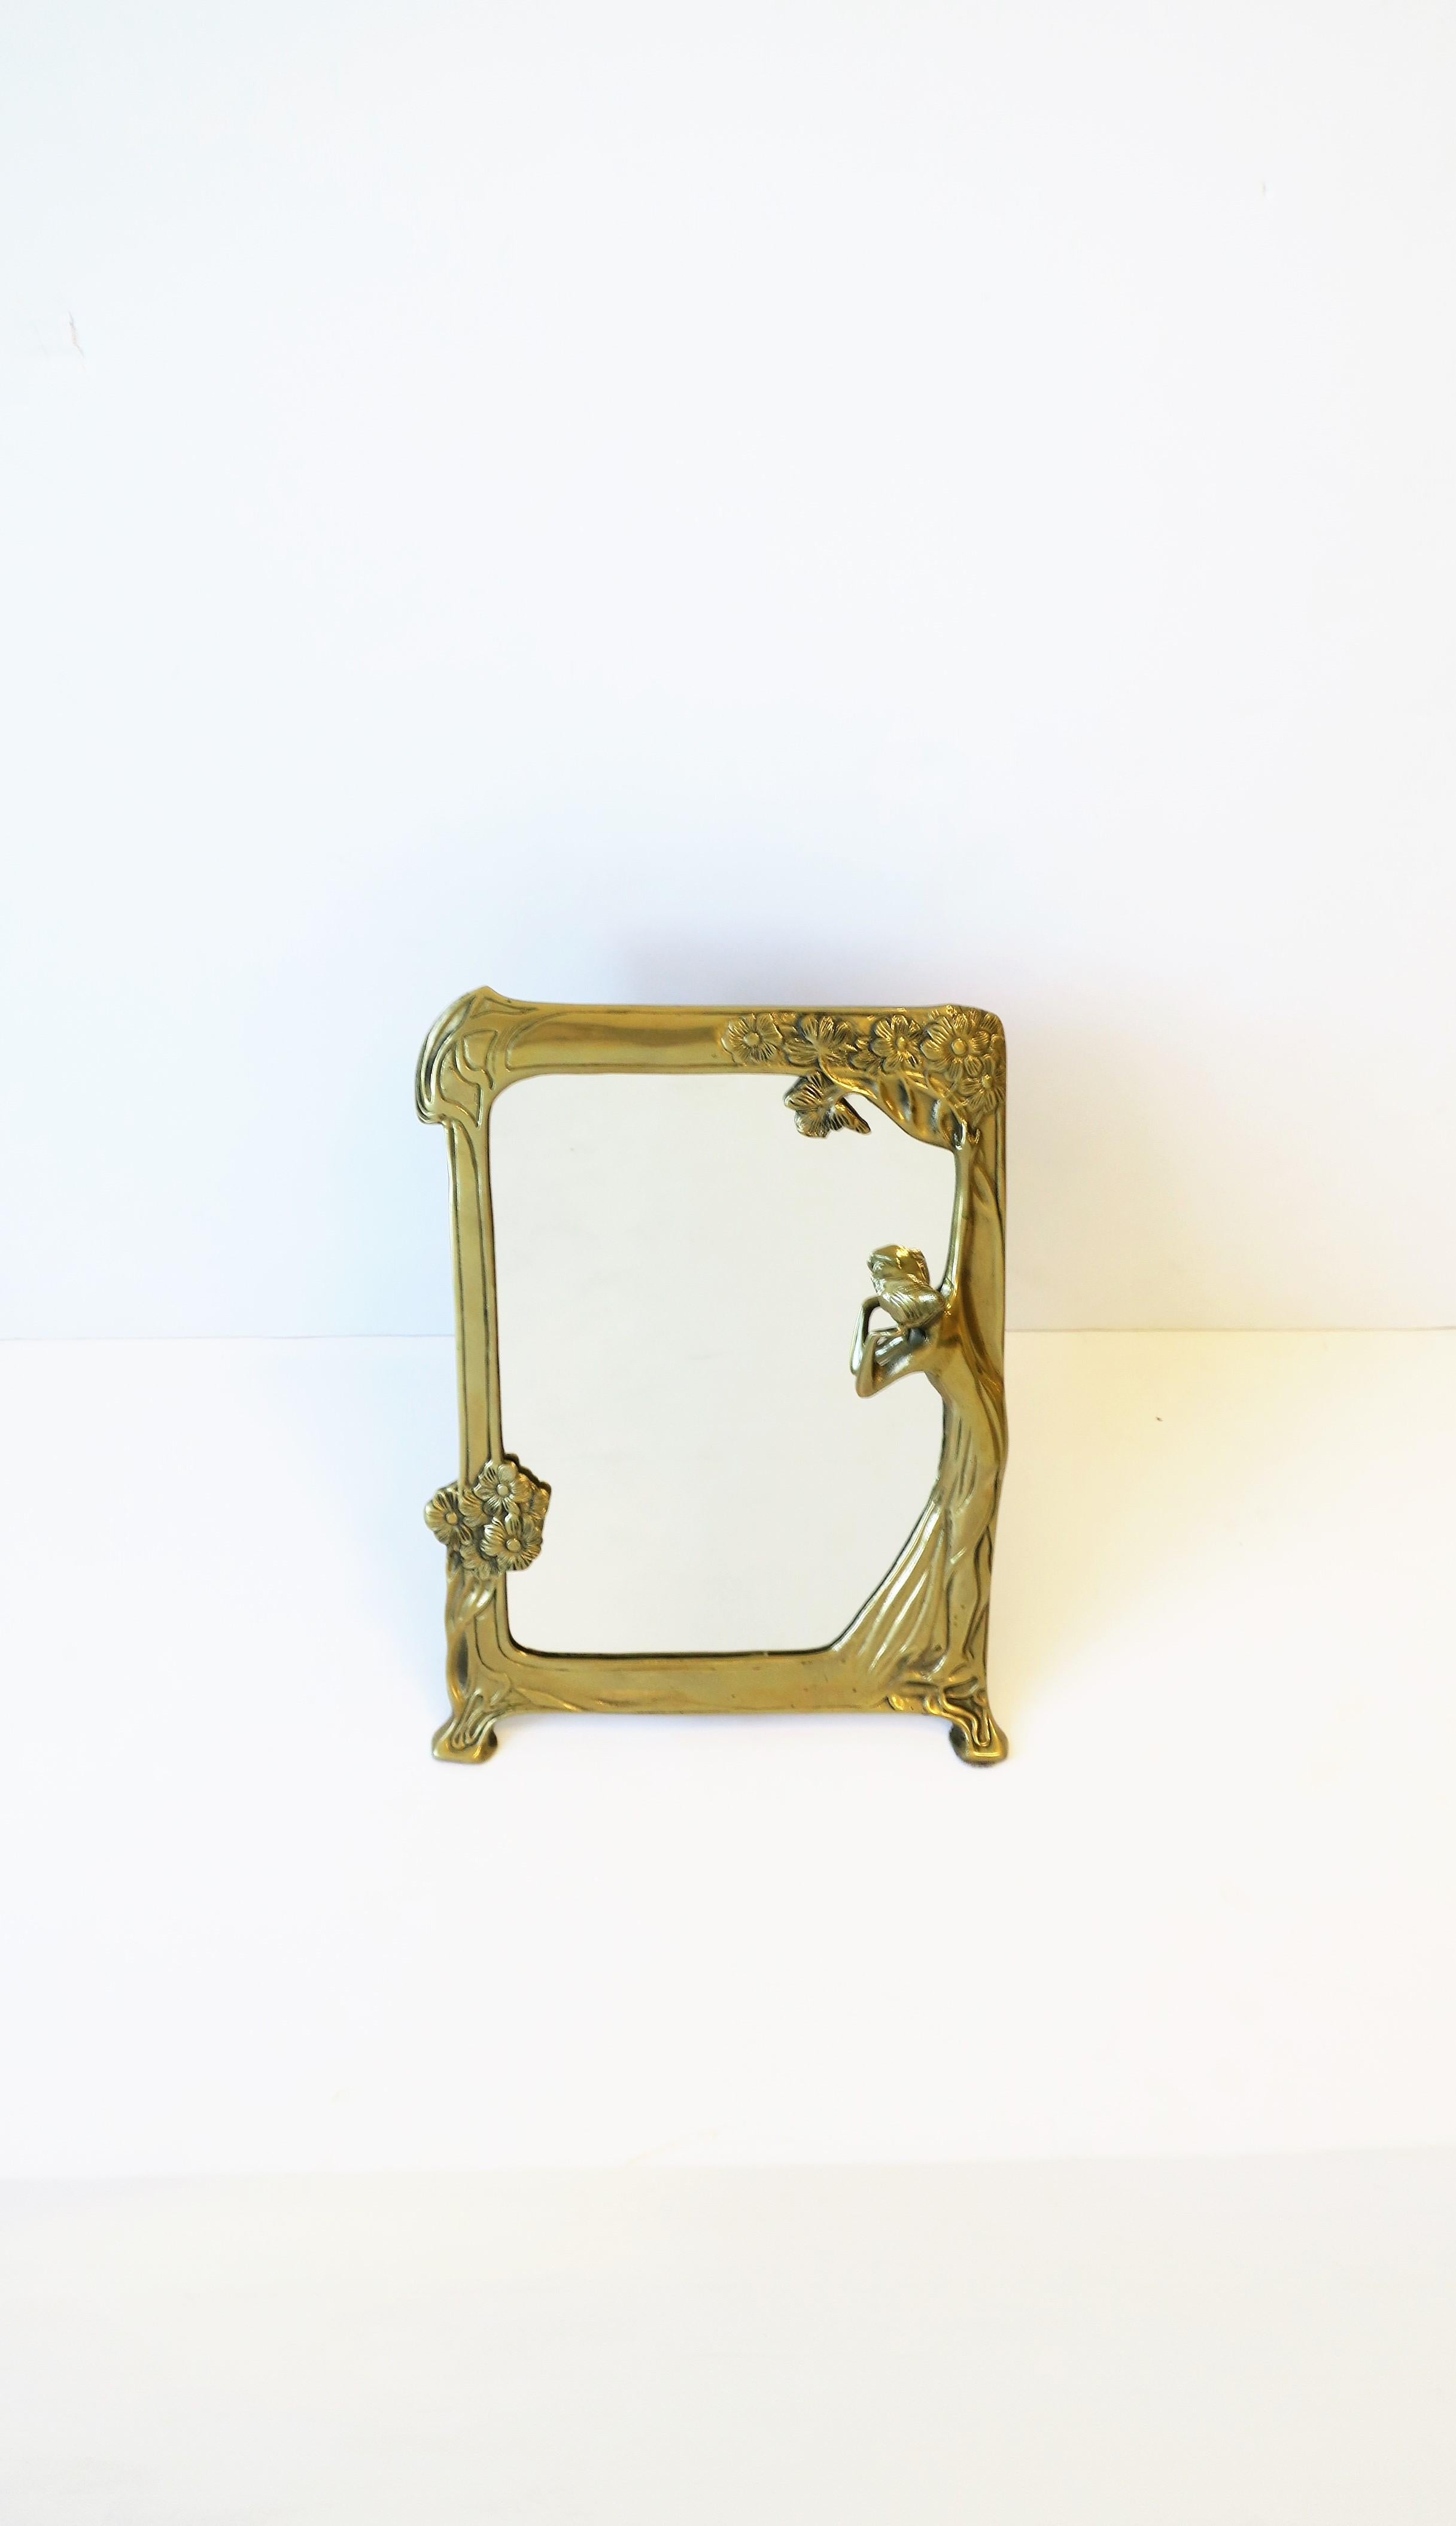 A brass vanity table mirror in the Art Nouveau style, circa late 20th century. A solid brass frame featuring women and flowers. A great piece for a vanity area, walk-in closet, bathroom, etc. Piece measures: 10